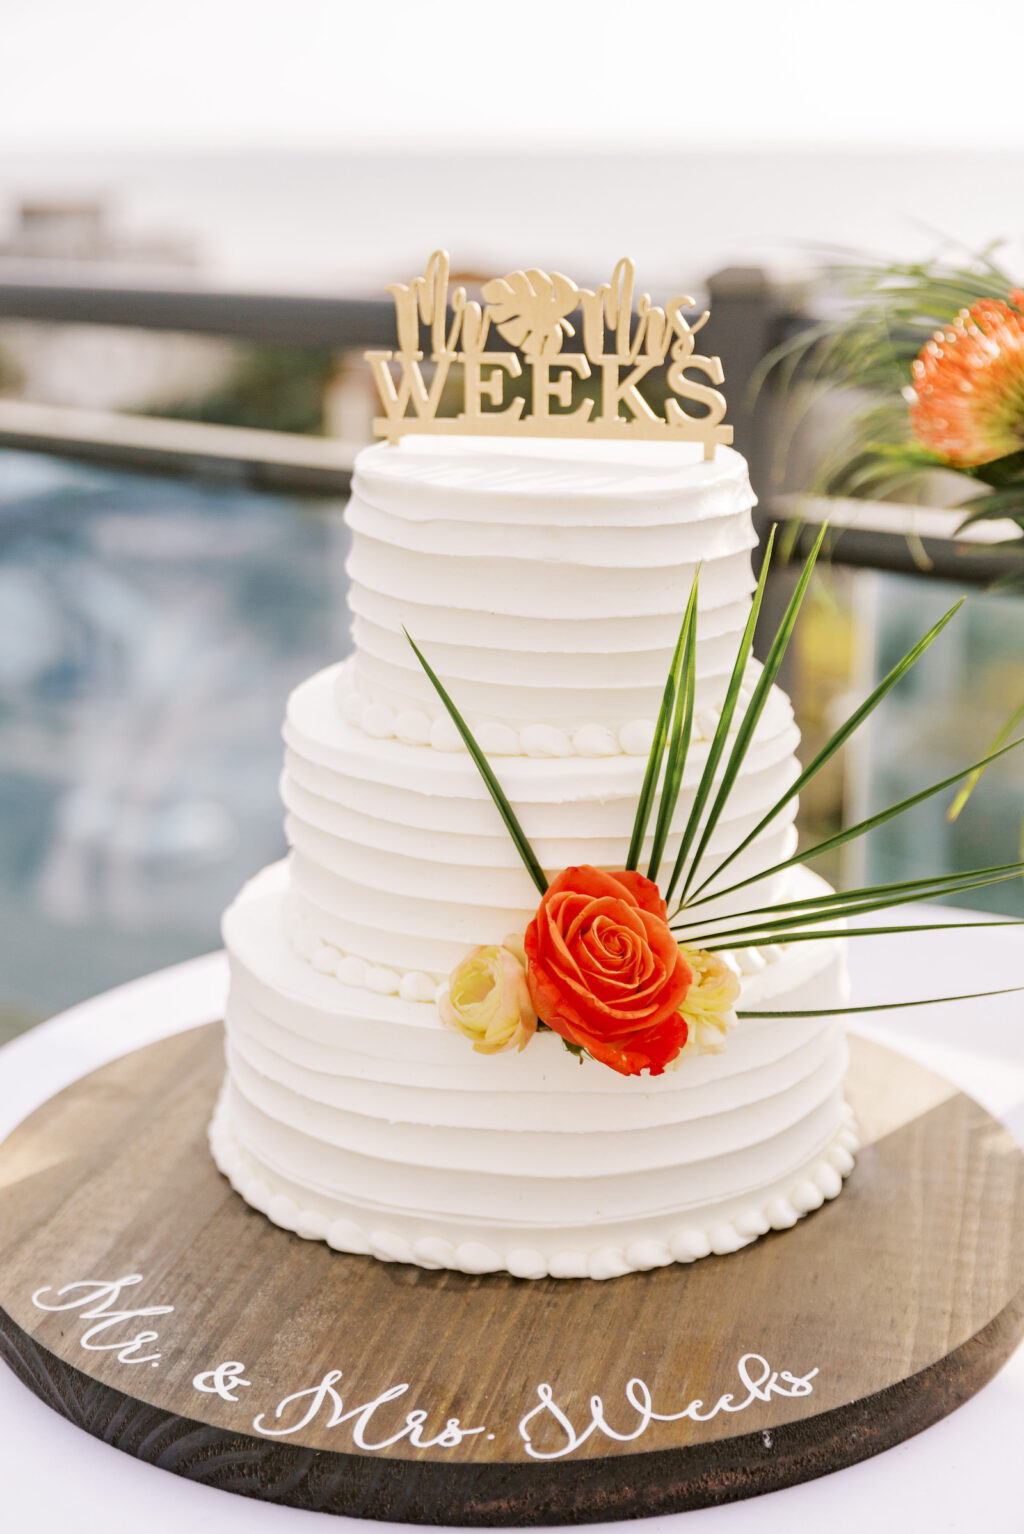 Three Tier Textured White Wedding Cake with Orange and Yellow Roses, Palm Fronds, Laser Cut Gold Cake Topper on Wooden Cake Stand | Tampa Bay Wedding Planner Coastal Coordinating